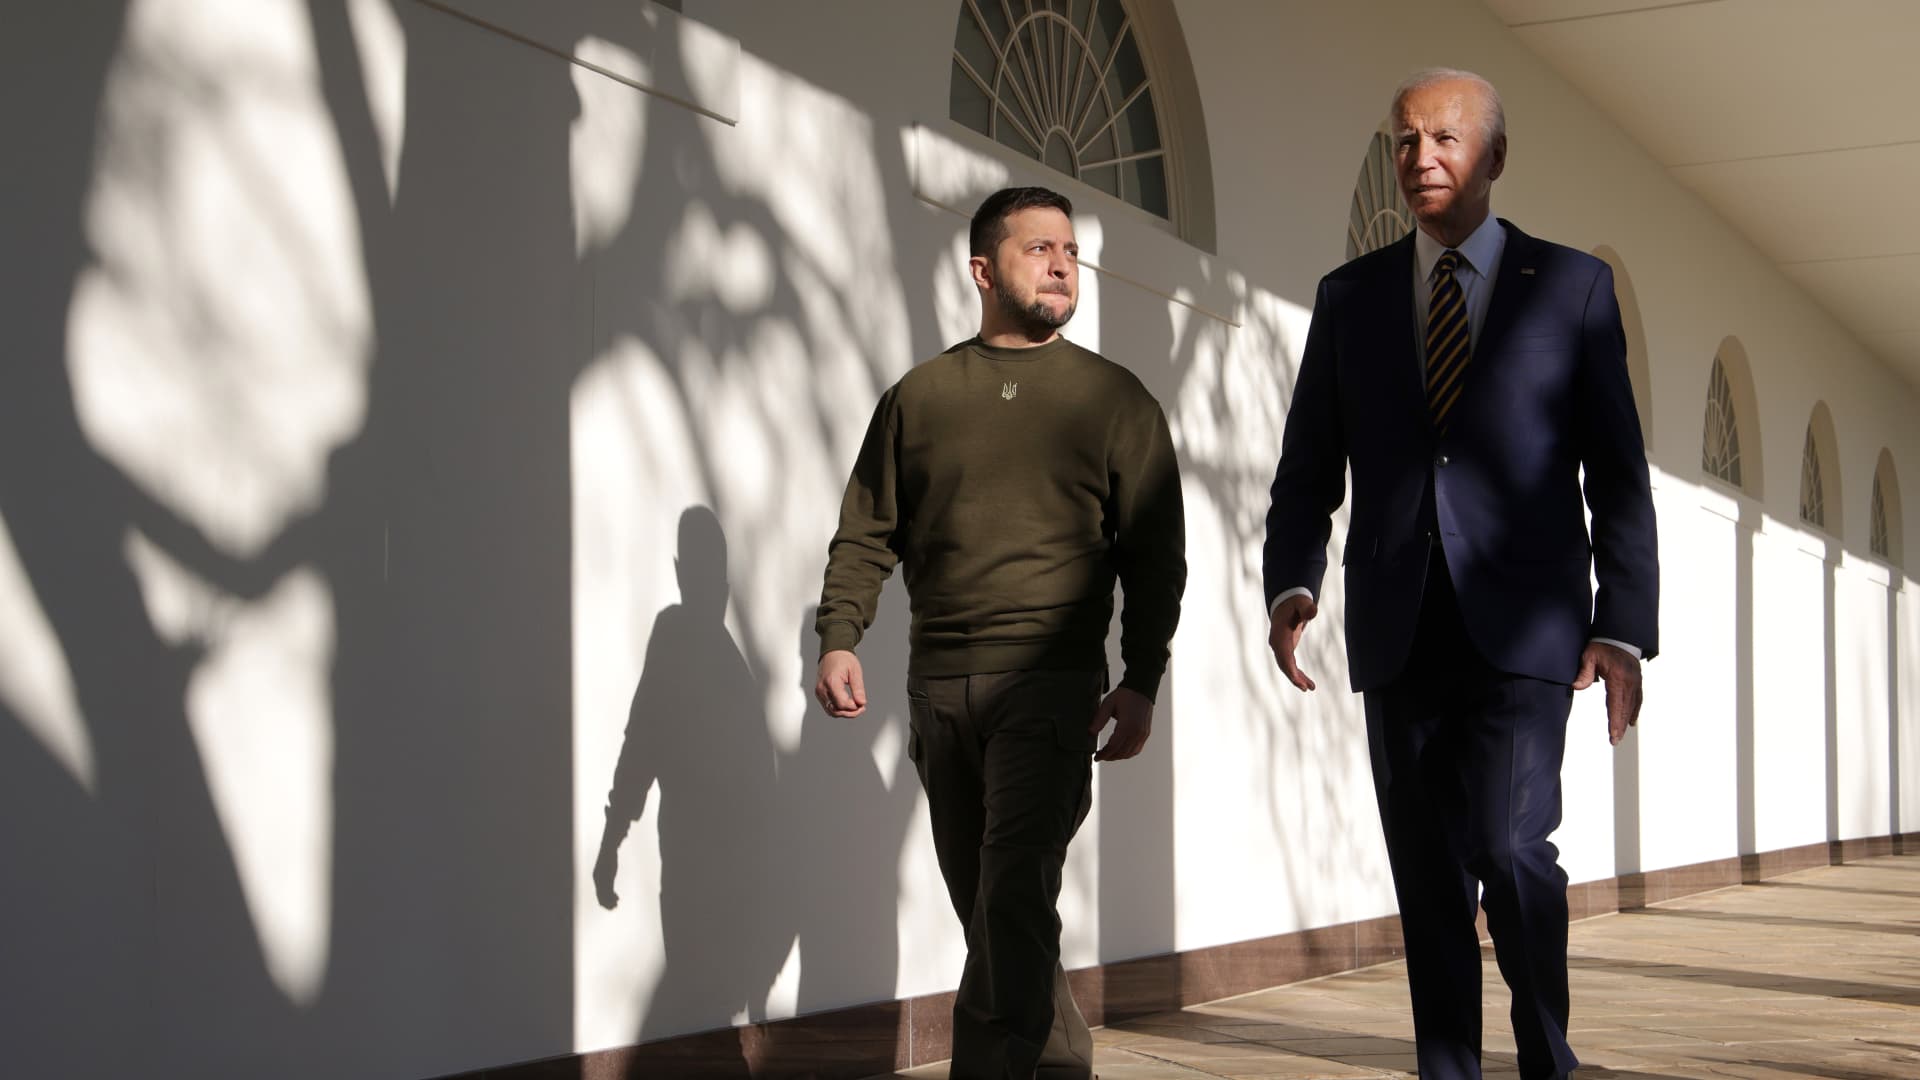 WASHINGTON, DC - DECEMBER 21: U.S. President Joe Biden (R) and President of Ukraine Volodymyr Zelensky walk down the Colonnade as they make their way to the Oval Office at the White House on December 21, 2022 in Washington, DC. Zelensky is meeting with President Biden on his first known trip outside of Ukraine since the Russian invasion began, and the two leaders are expected to discuss continuing military aid. Zelensky will reportedly address a joint meeting of Congress in the evening. (Photo by Alex Wong/Getty Images)